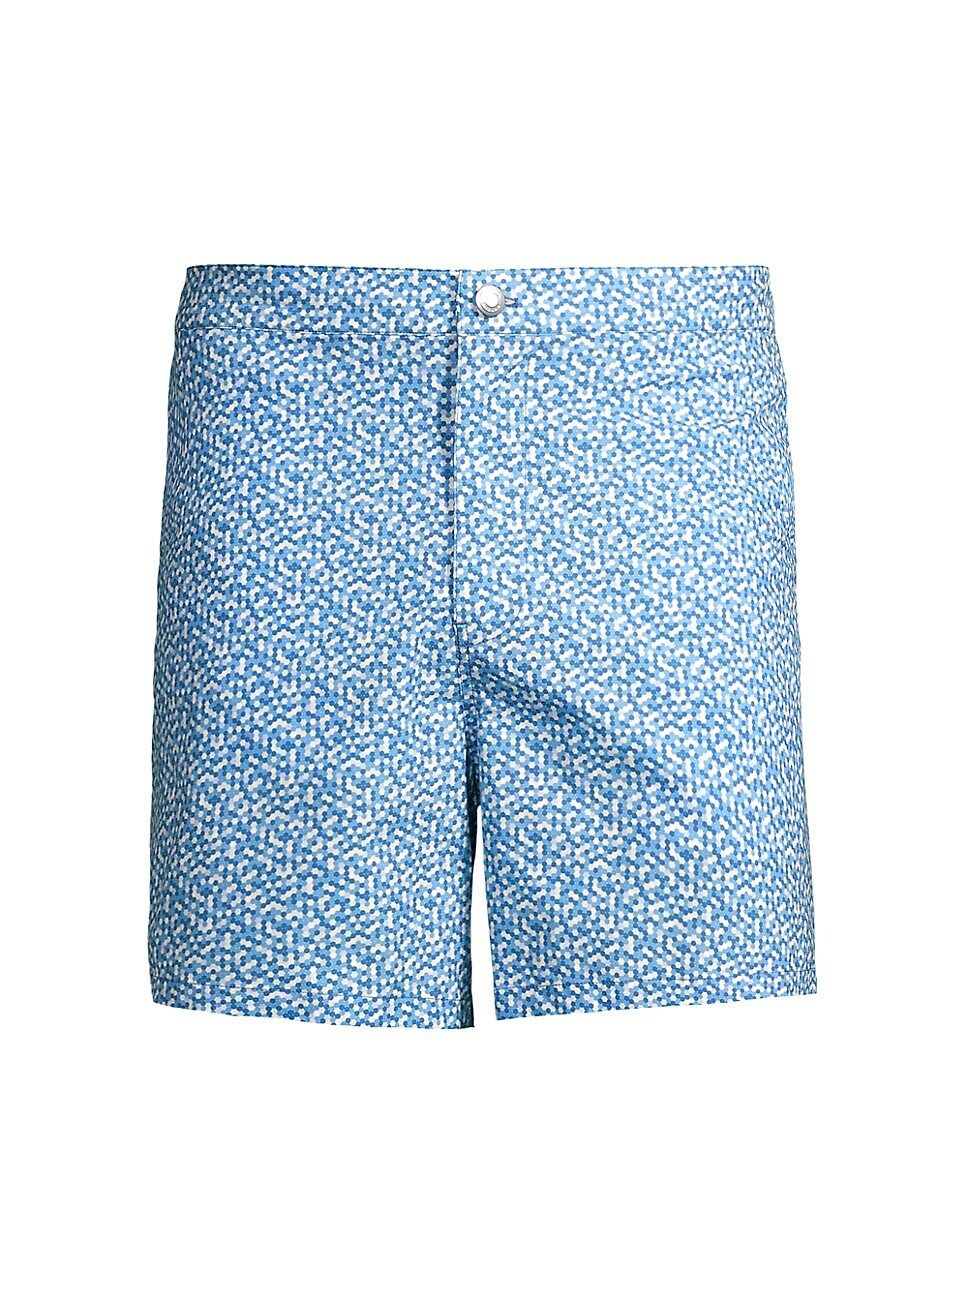 Crown Crafted Palma Dot Swim Shorts | Saks Fifth Avenue